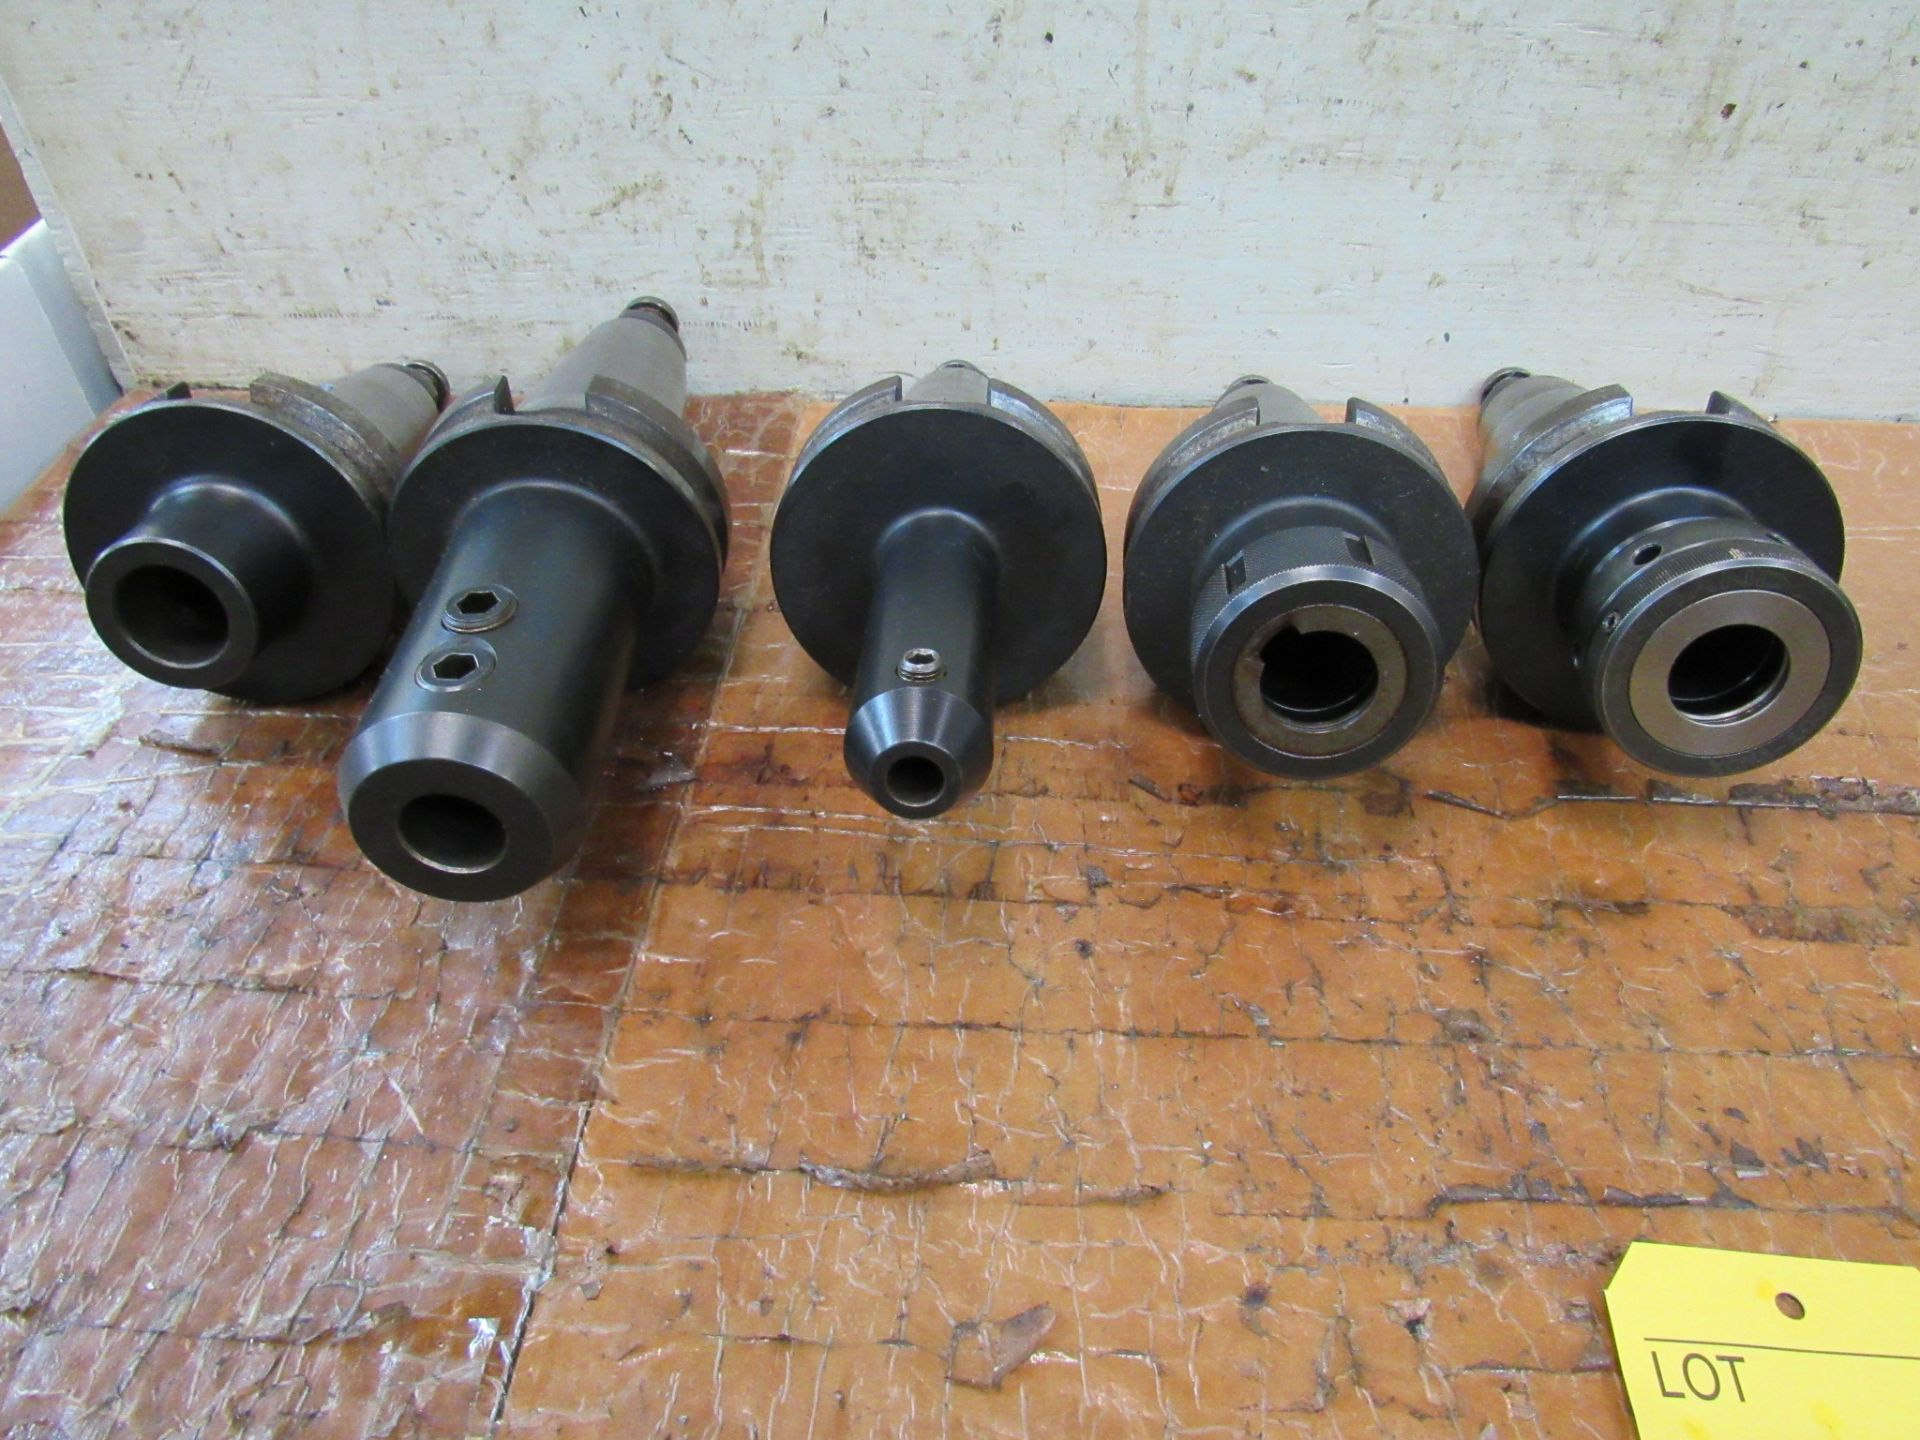 LOT OF 5 50 MORSE TAPER TOOL HOLDERS - Image 2 of 2